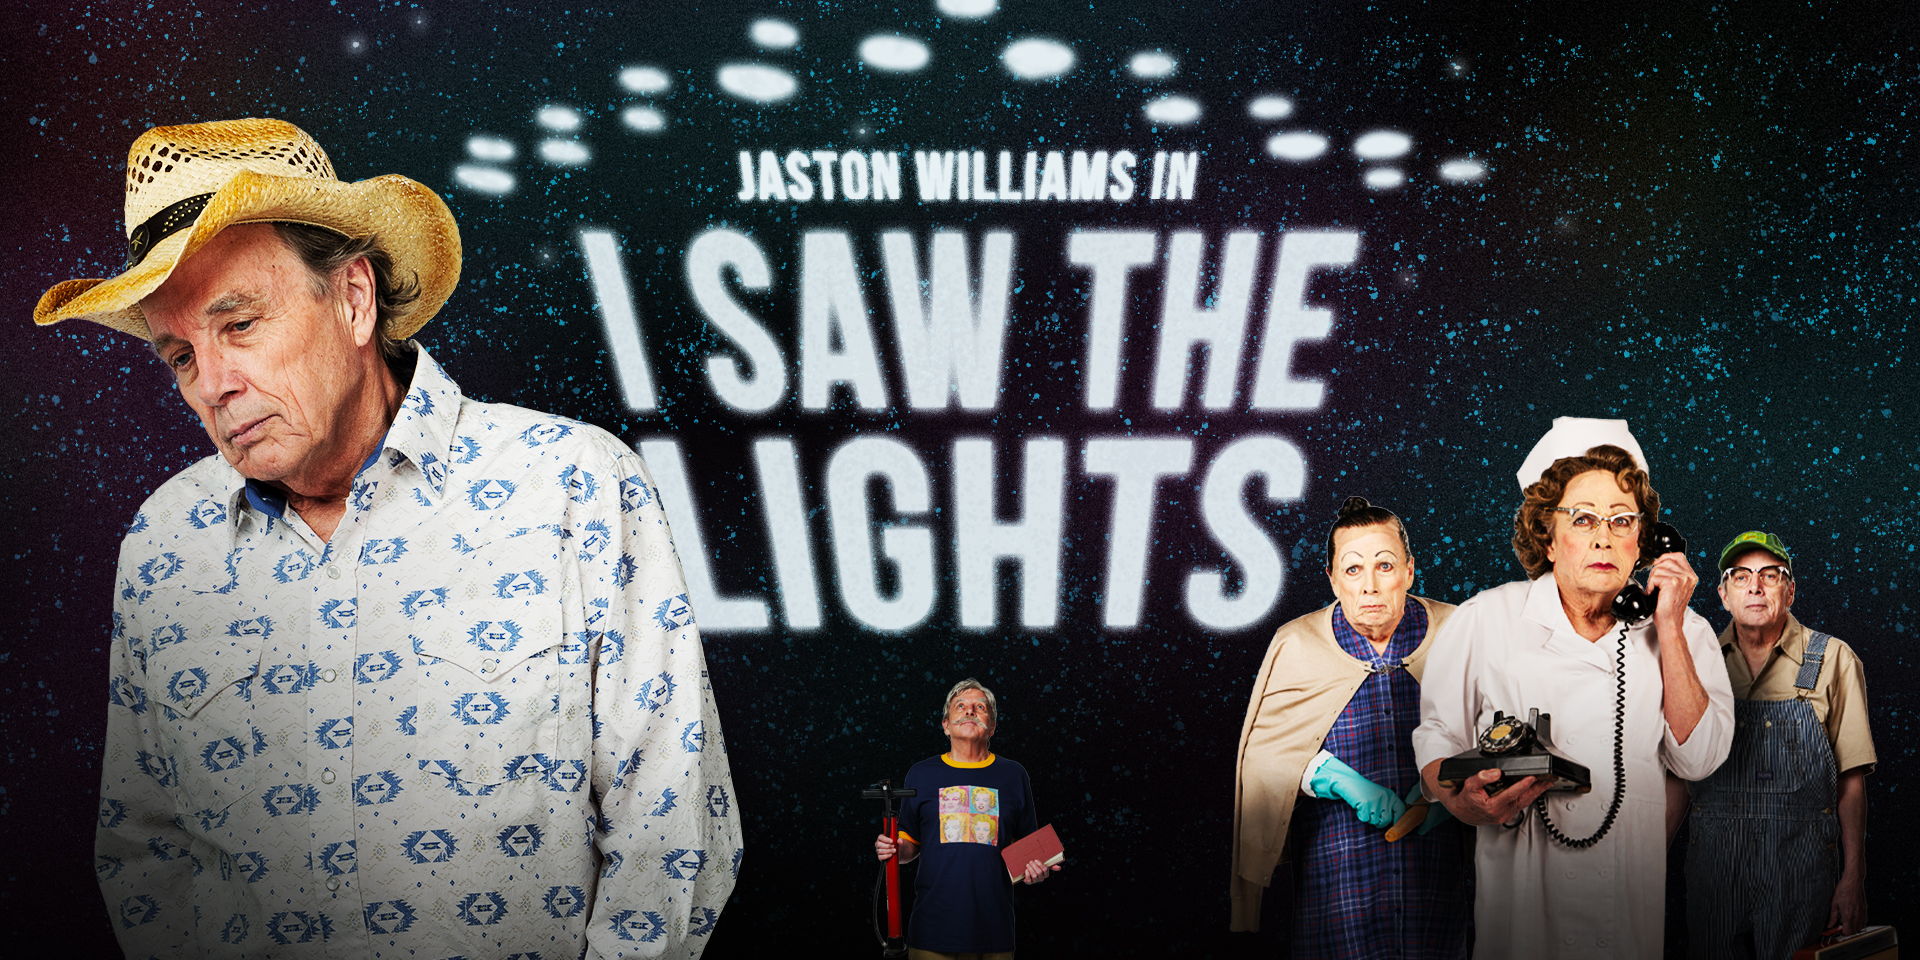 "I Saw the Lights" with Jaston Williams promotional image